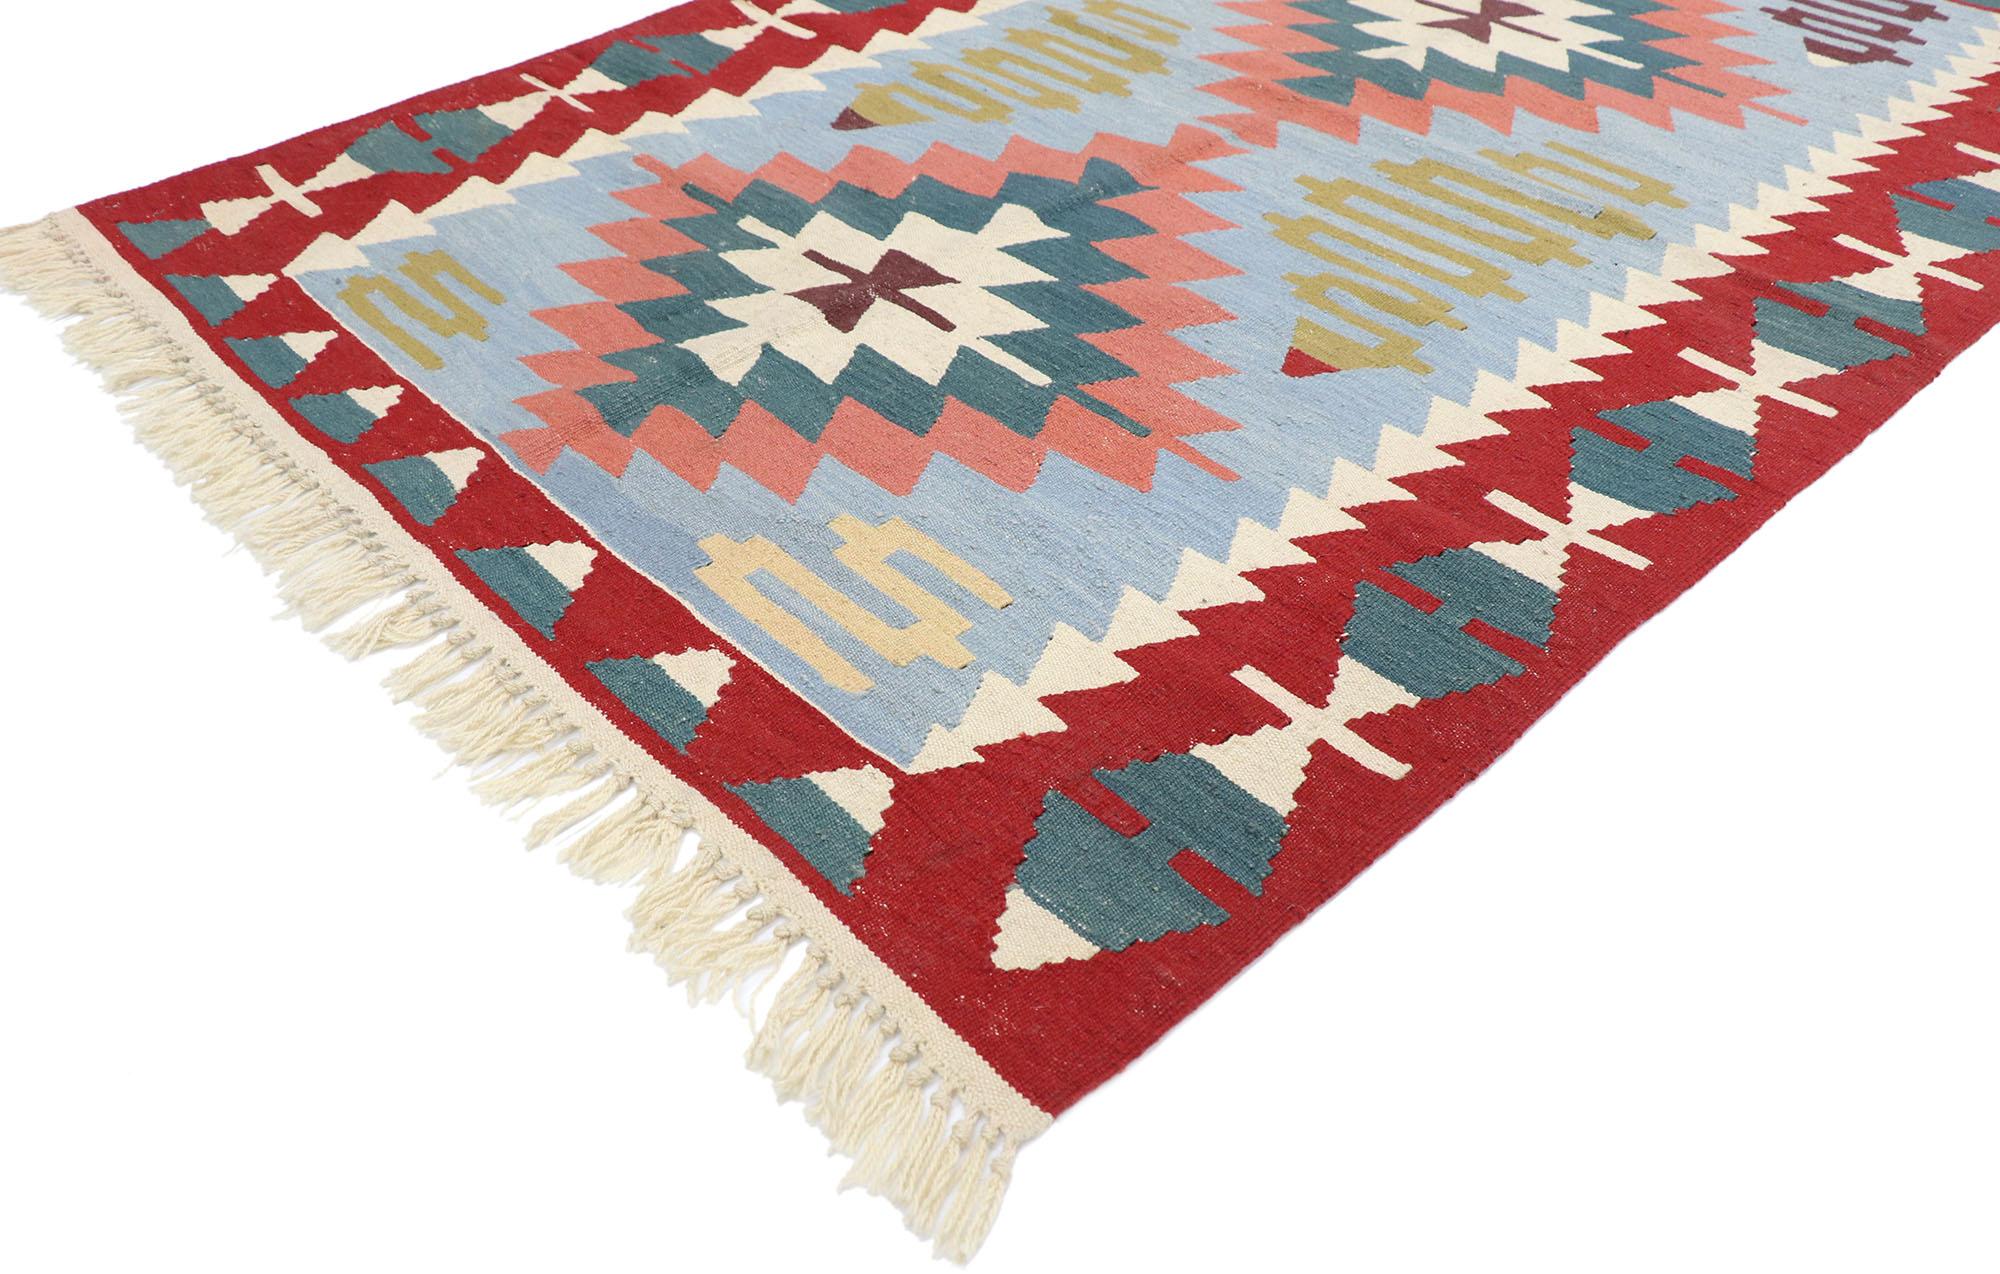 77807 Vintage Persian Shiraz Kilim rug with Bohemian Tribal Style 04'00 x 05'10. Full of tiny details and a bold expressive design combined with vibrant colors and tribal style, this hand-woven wool vintage Persian Shiraz kilim rug is a captivating